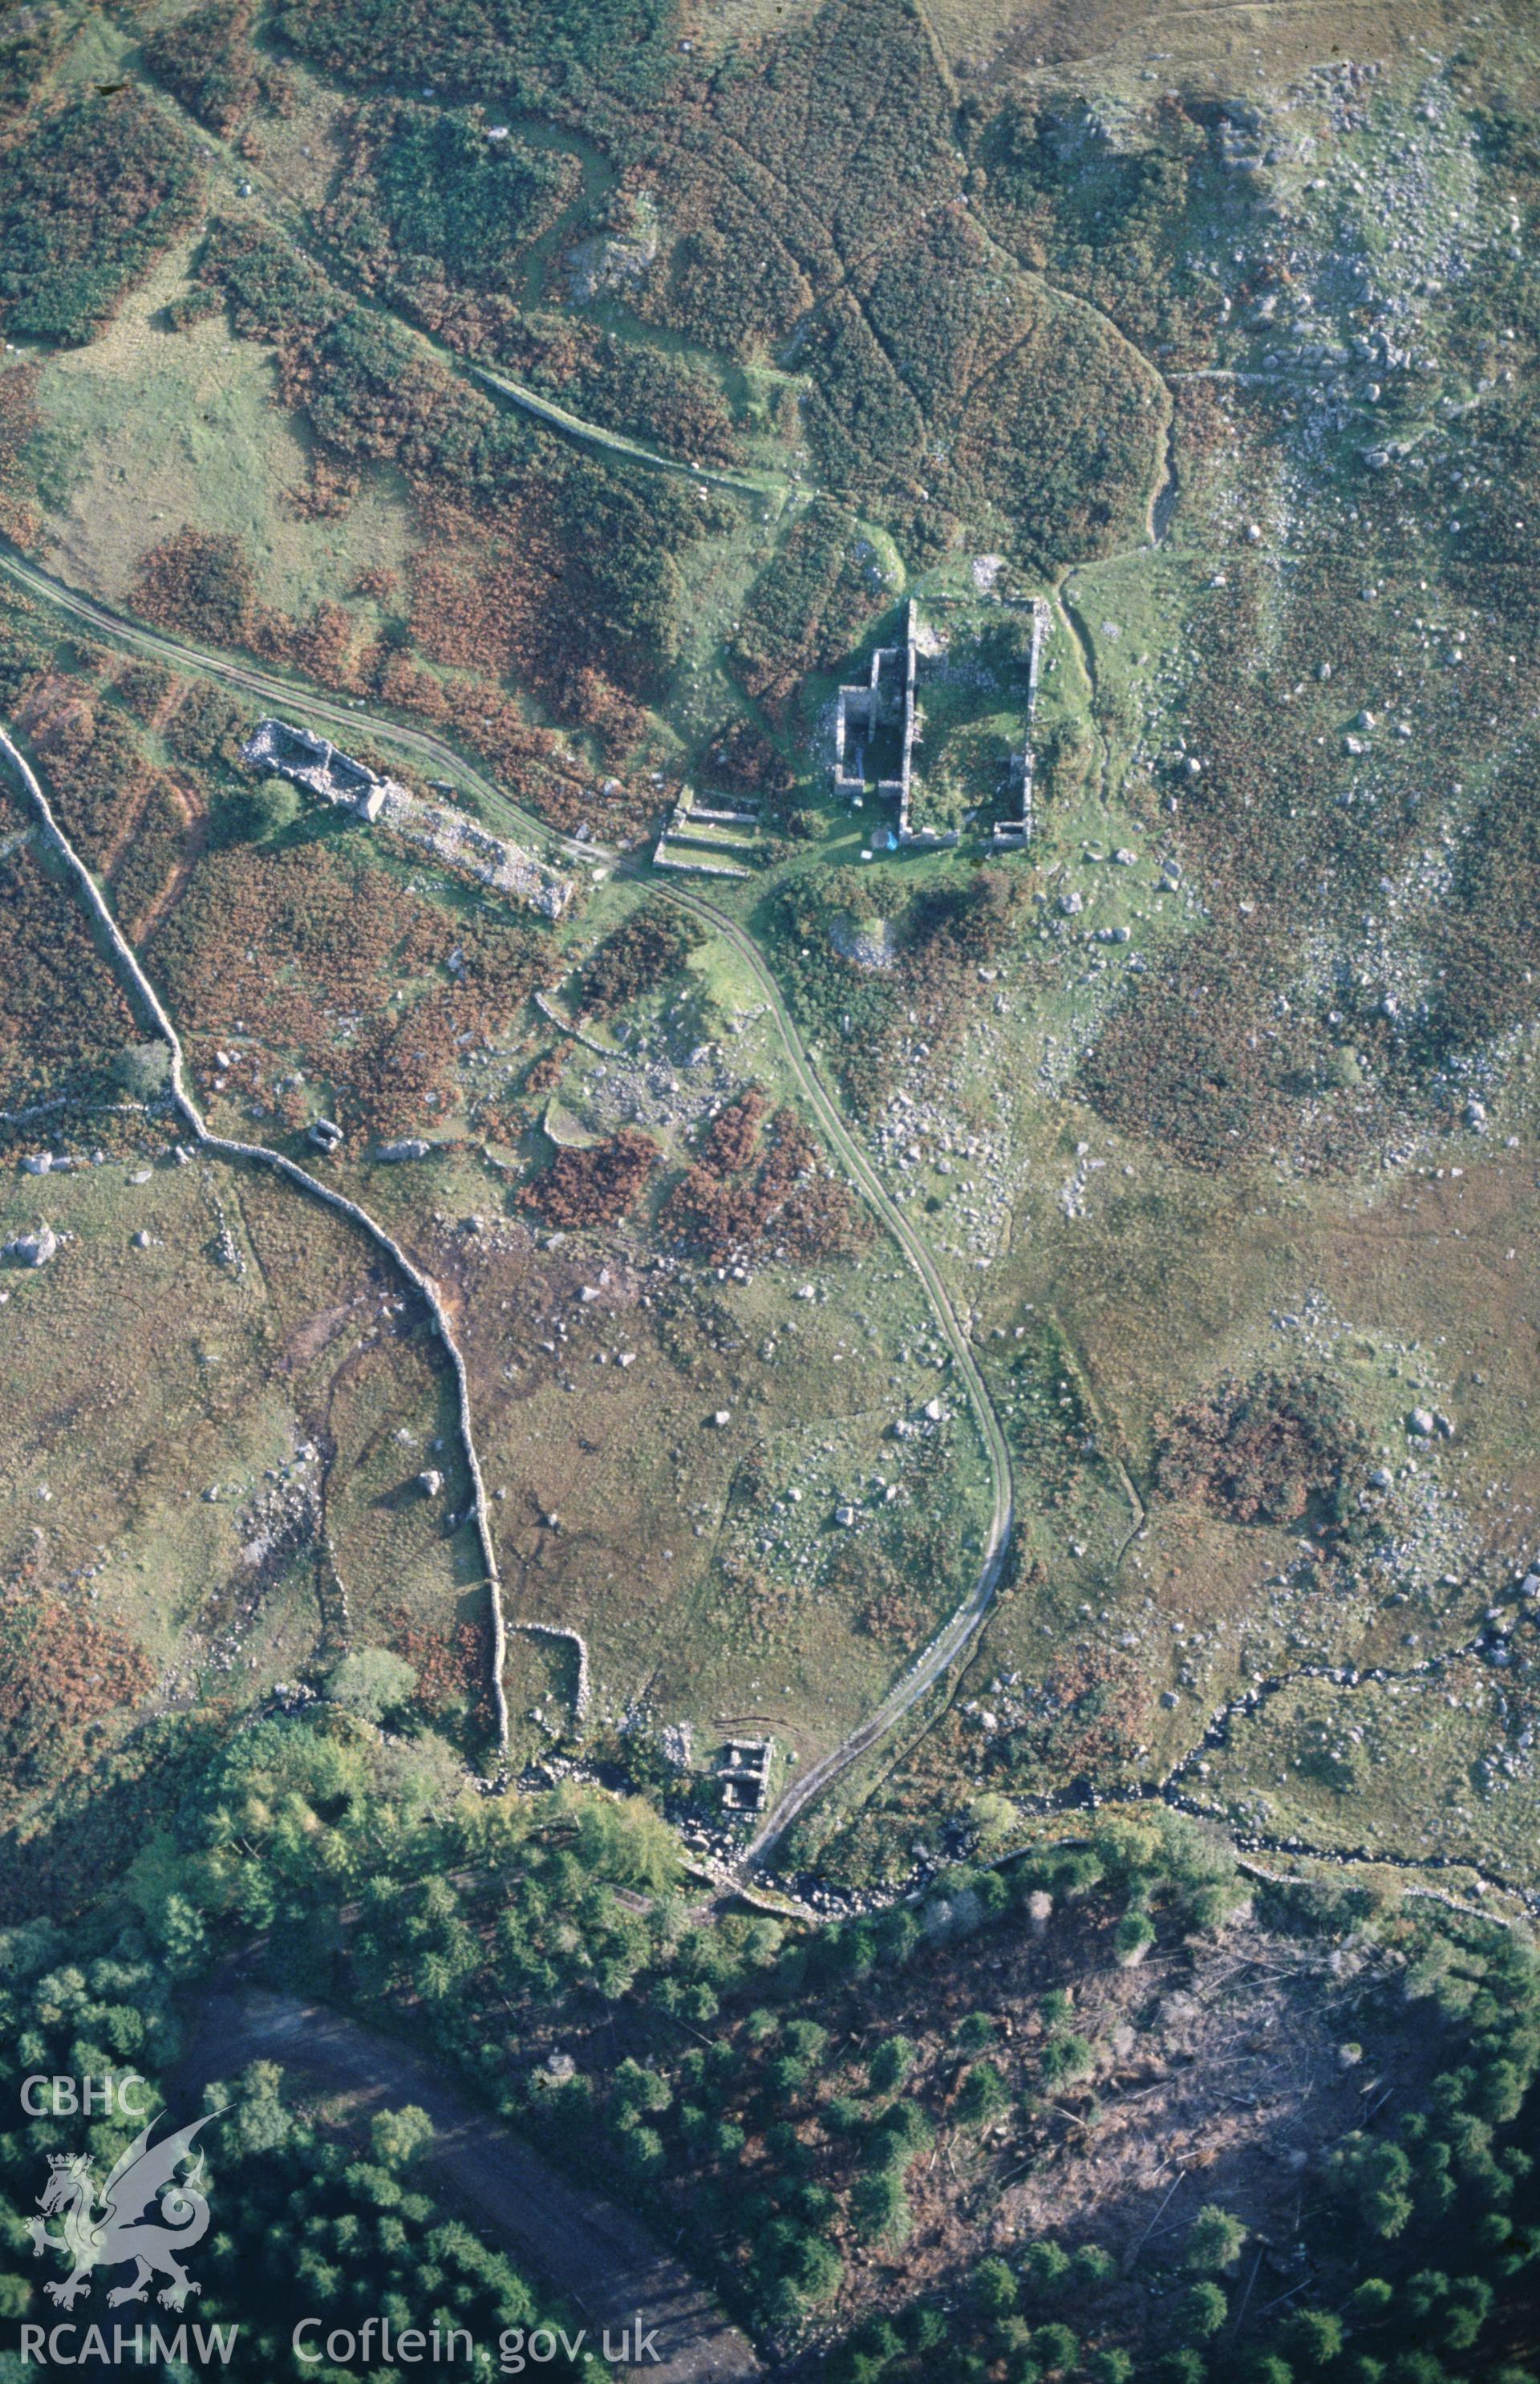 Slide of RCAHMW colour oblique aerial photograph of Berth-llwyd And Cefn Coch Gold Mining Complex, taken by C.R. Musson, 9/10/1994.